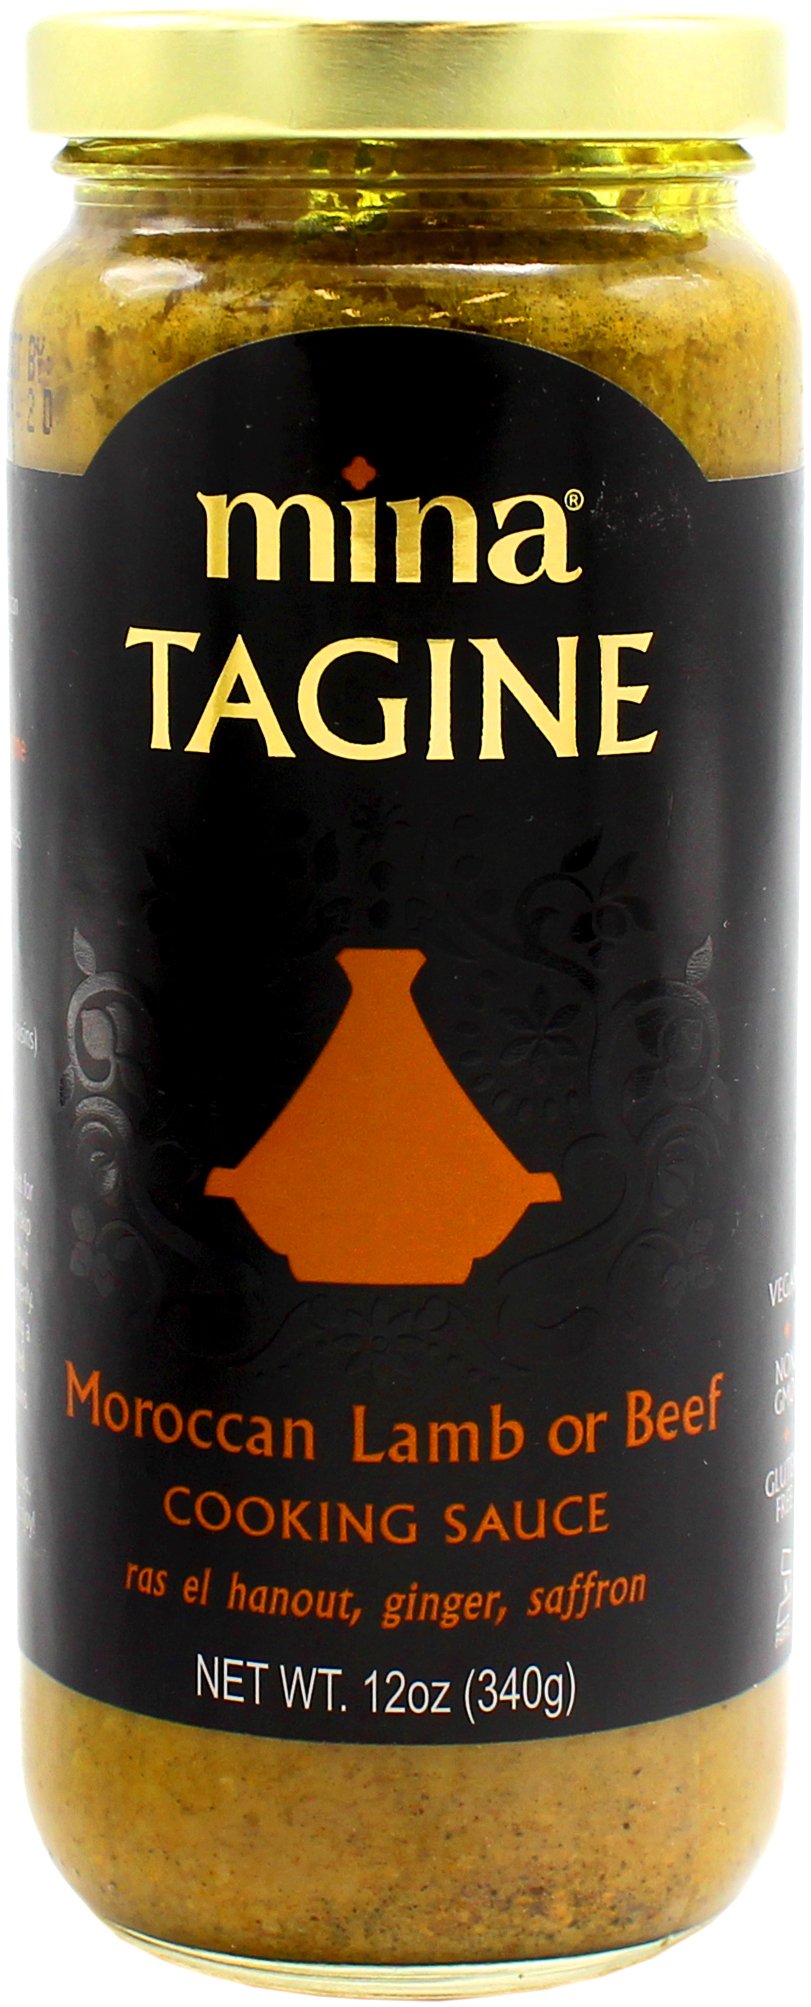 Mina Tagine Moroccan Lamb Or Beef Cooking Sauce Shop Specialty Sauces